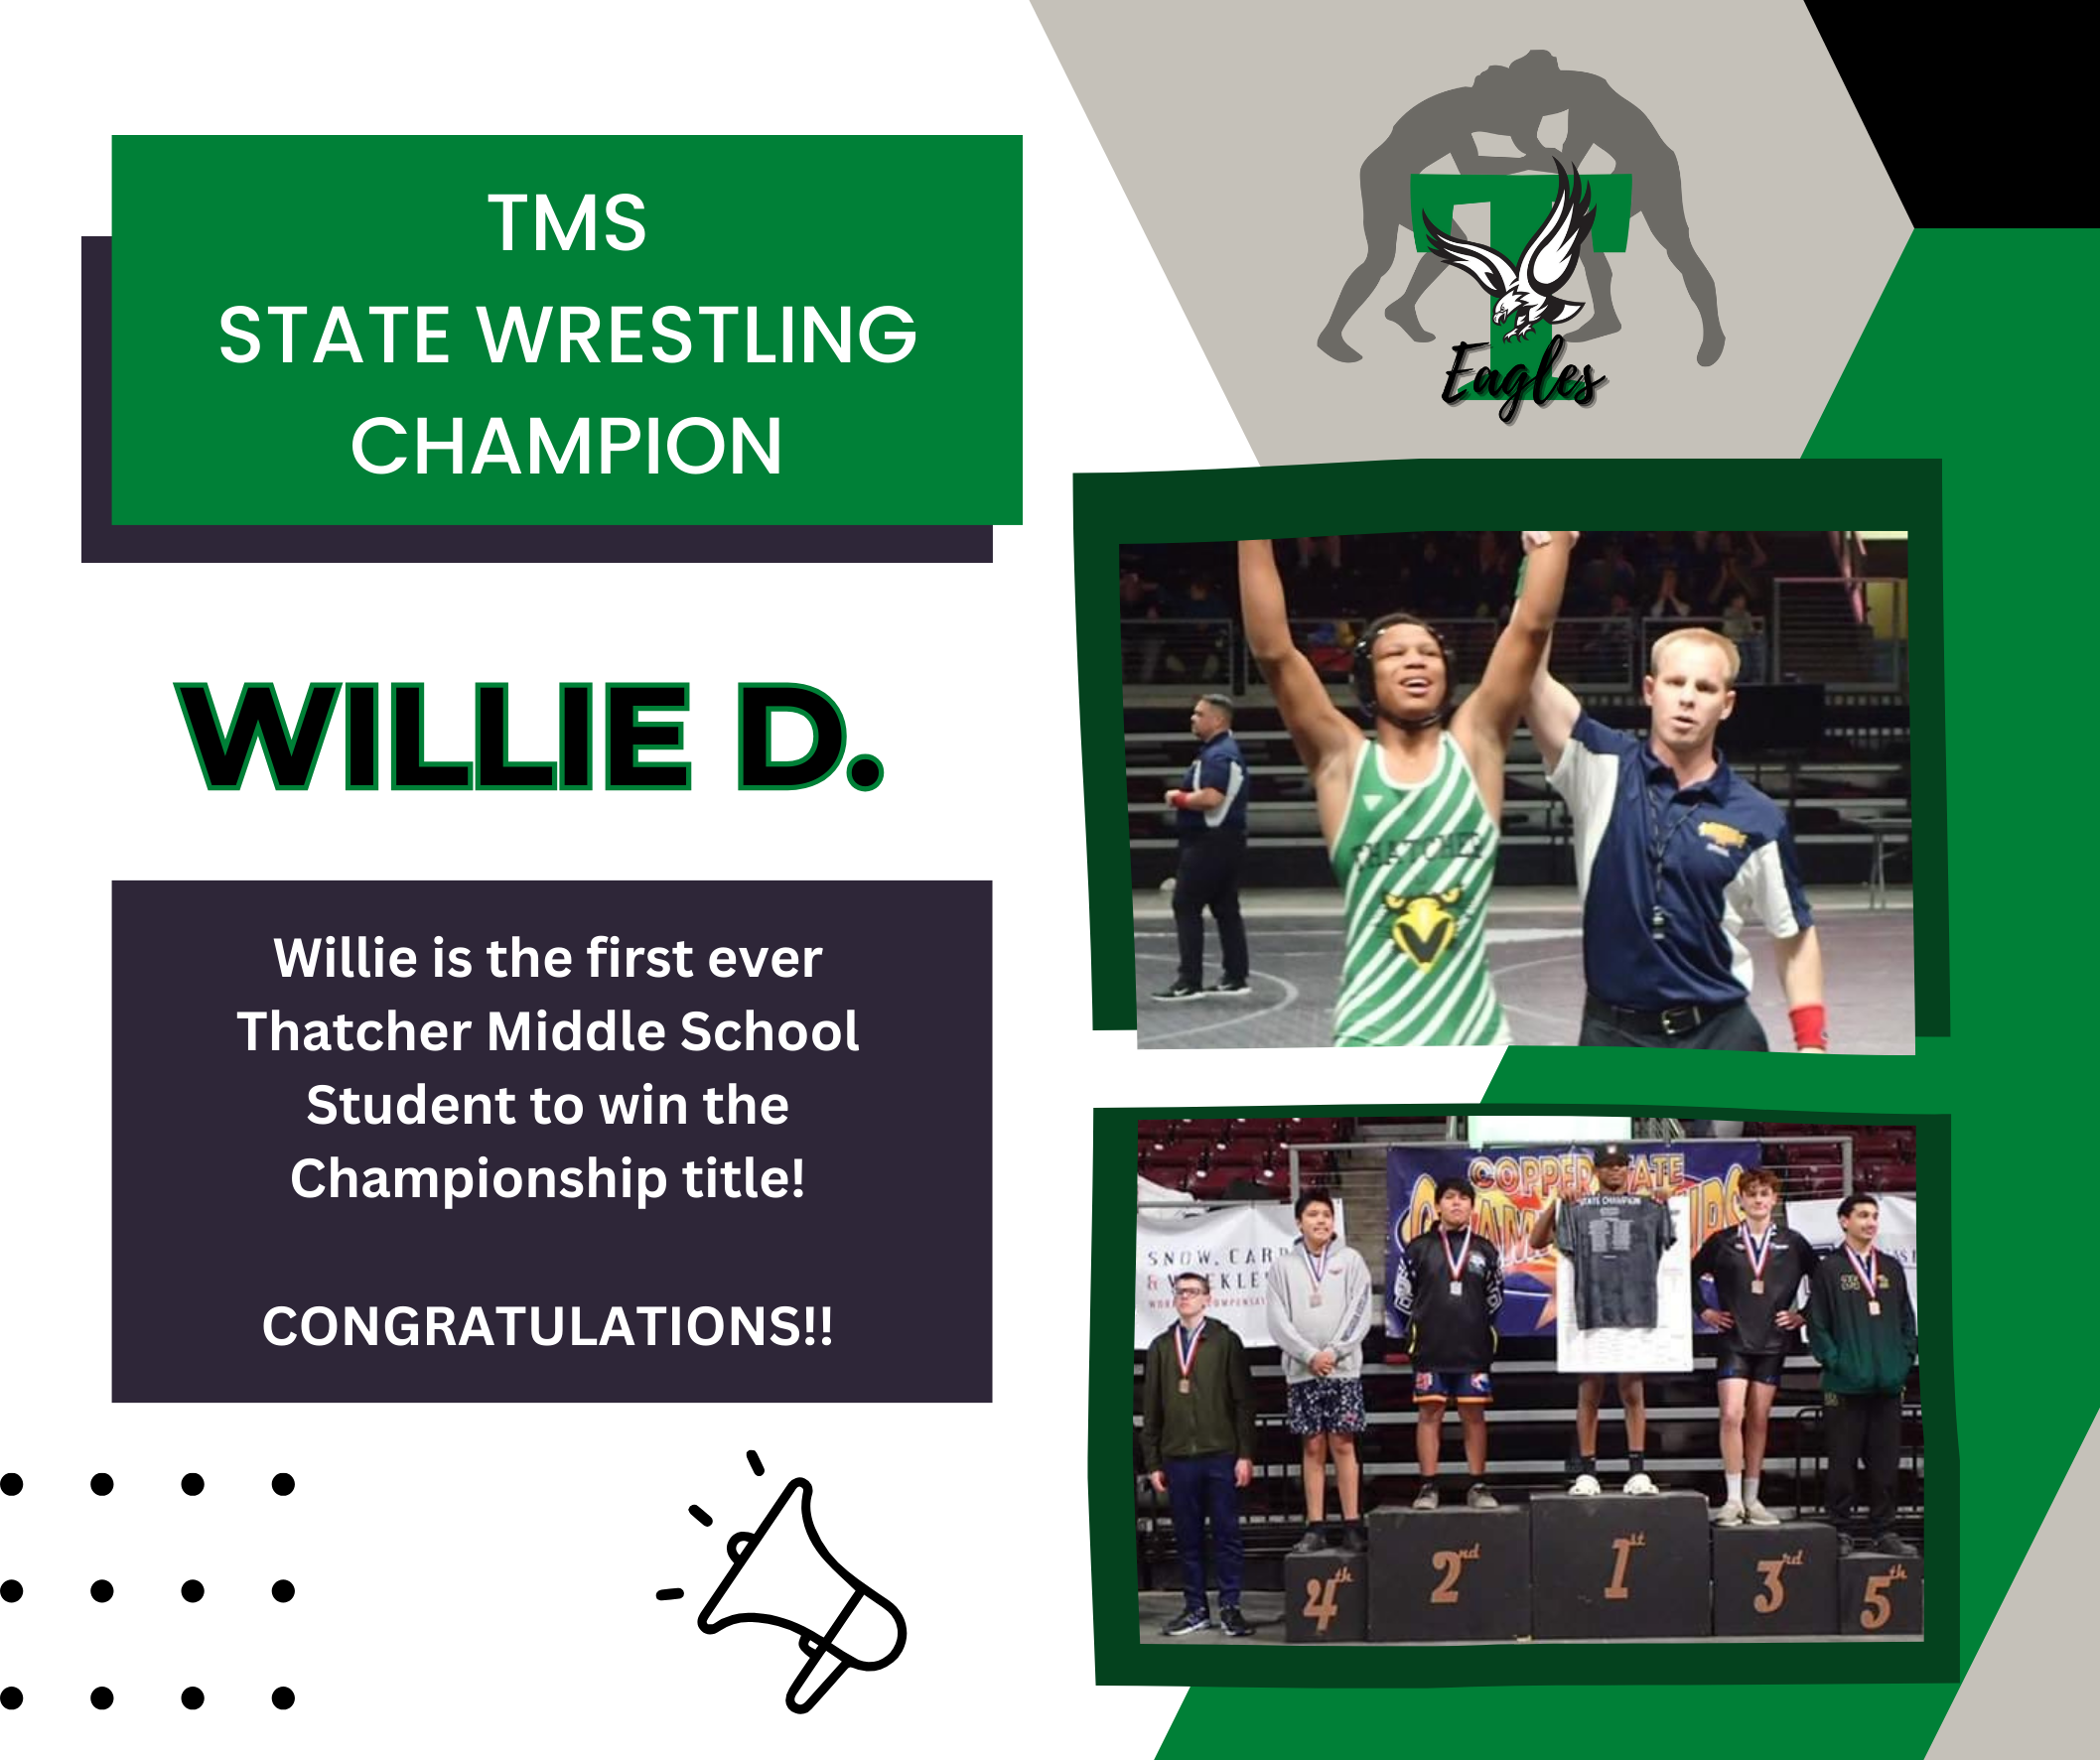 TMS State Wrestling Champion